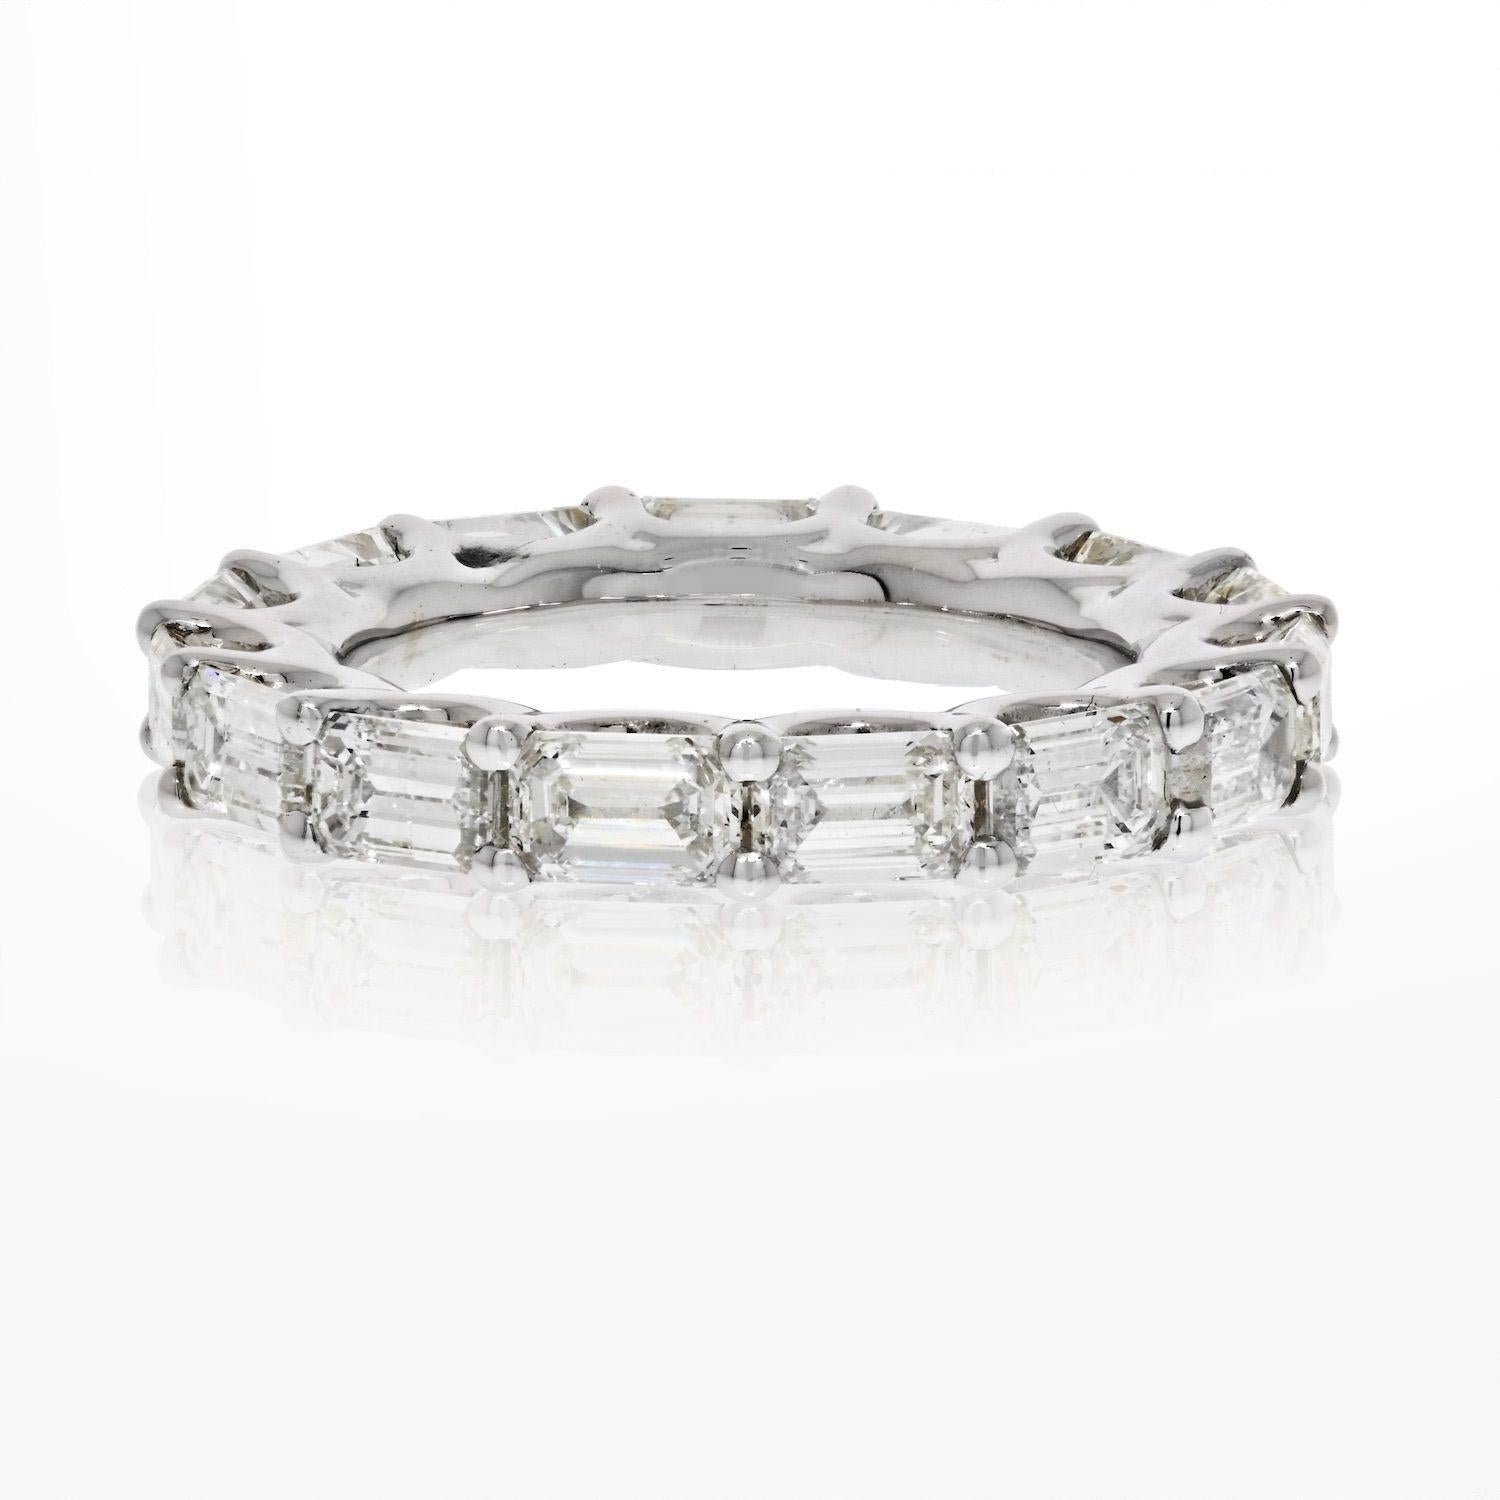 Lovely eternity band to add to your collection: 5.50cts Horizontal Emerald Cut Diamond Eternity Eternity Band in 14k white gold. Mounted in U-style setting with shared prongs. Size 7. 
Diamond Color: G-H, Diamond Clarity: VS-SI.